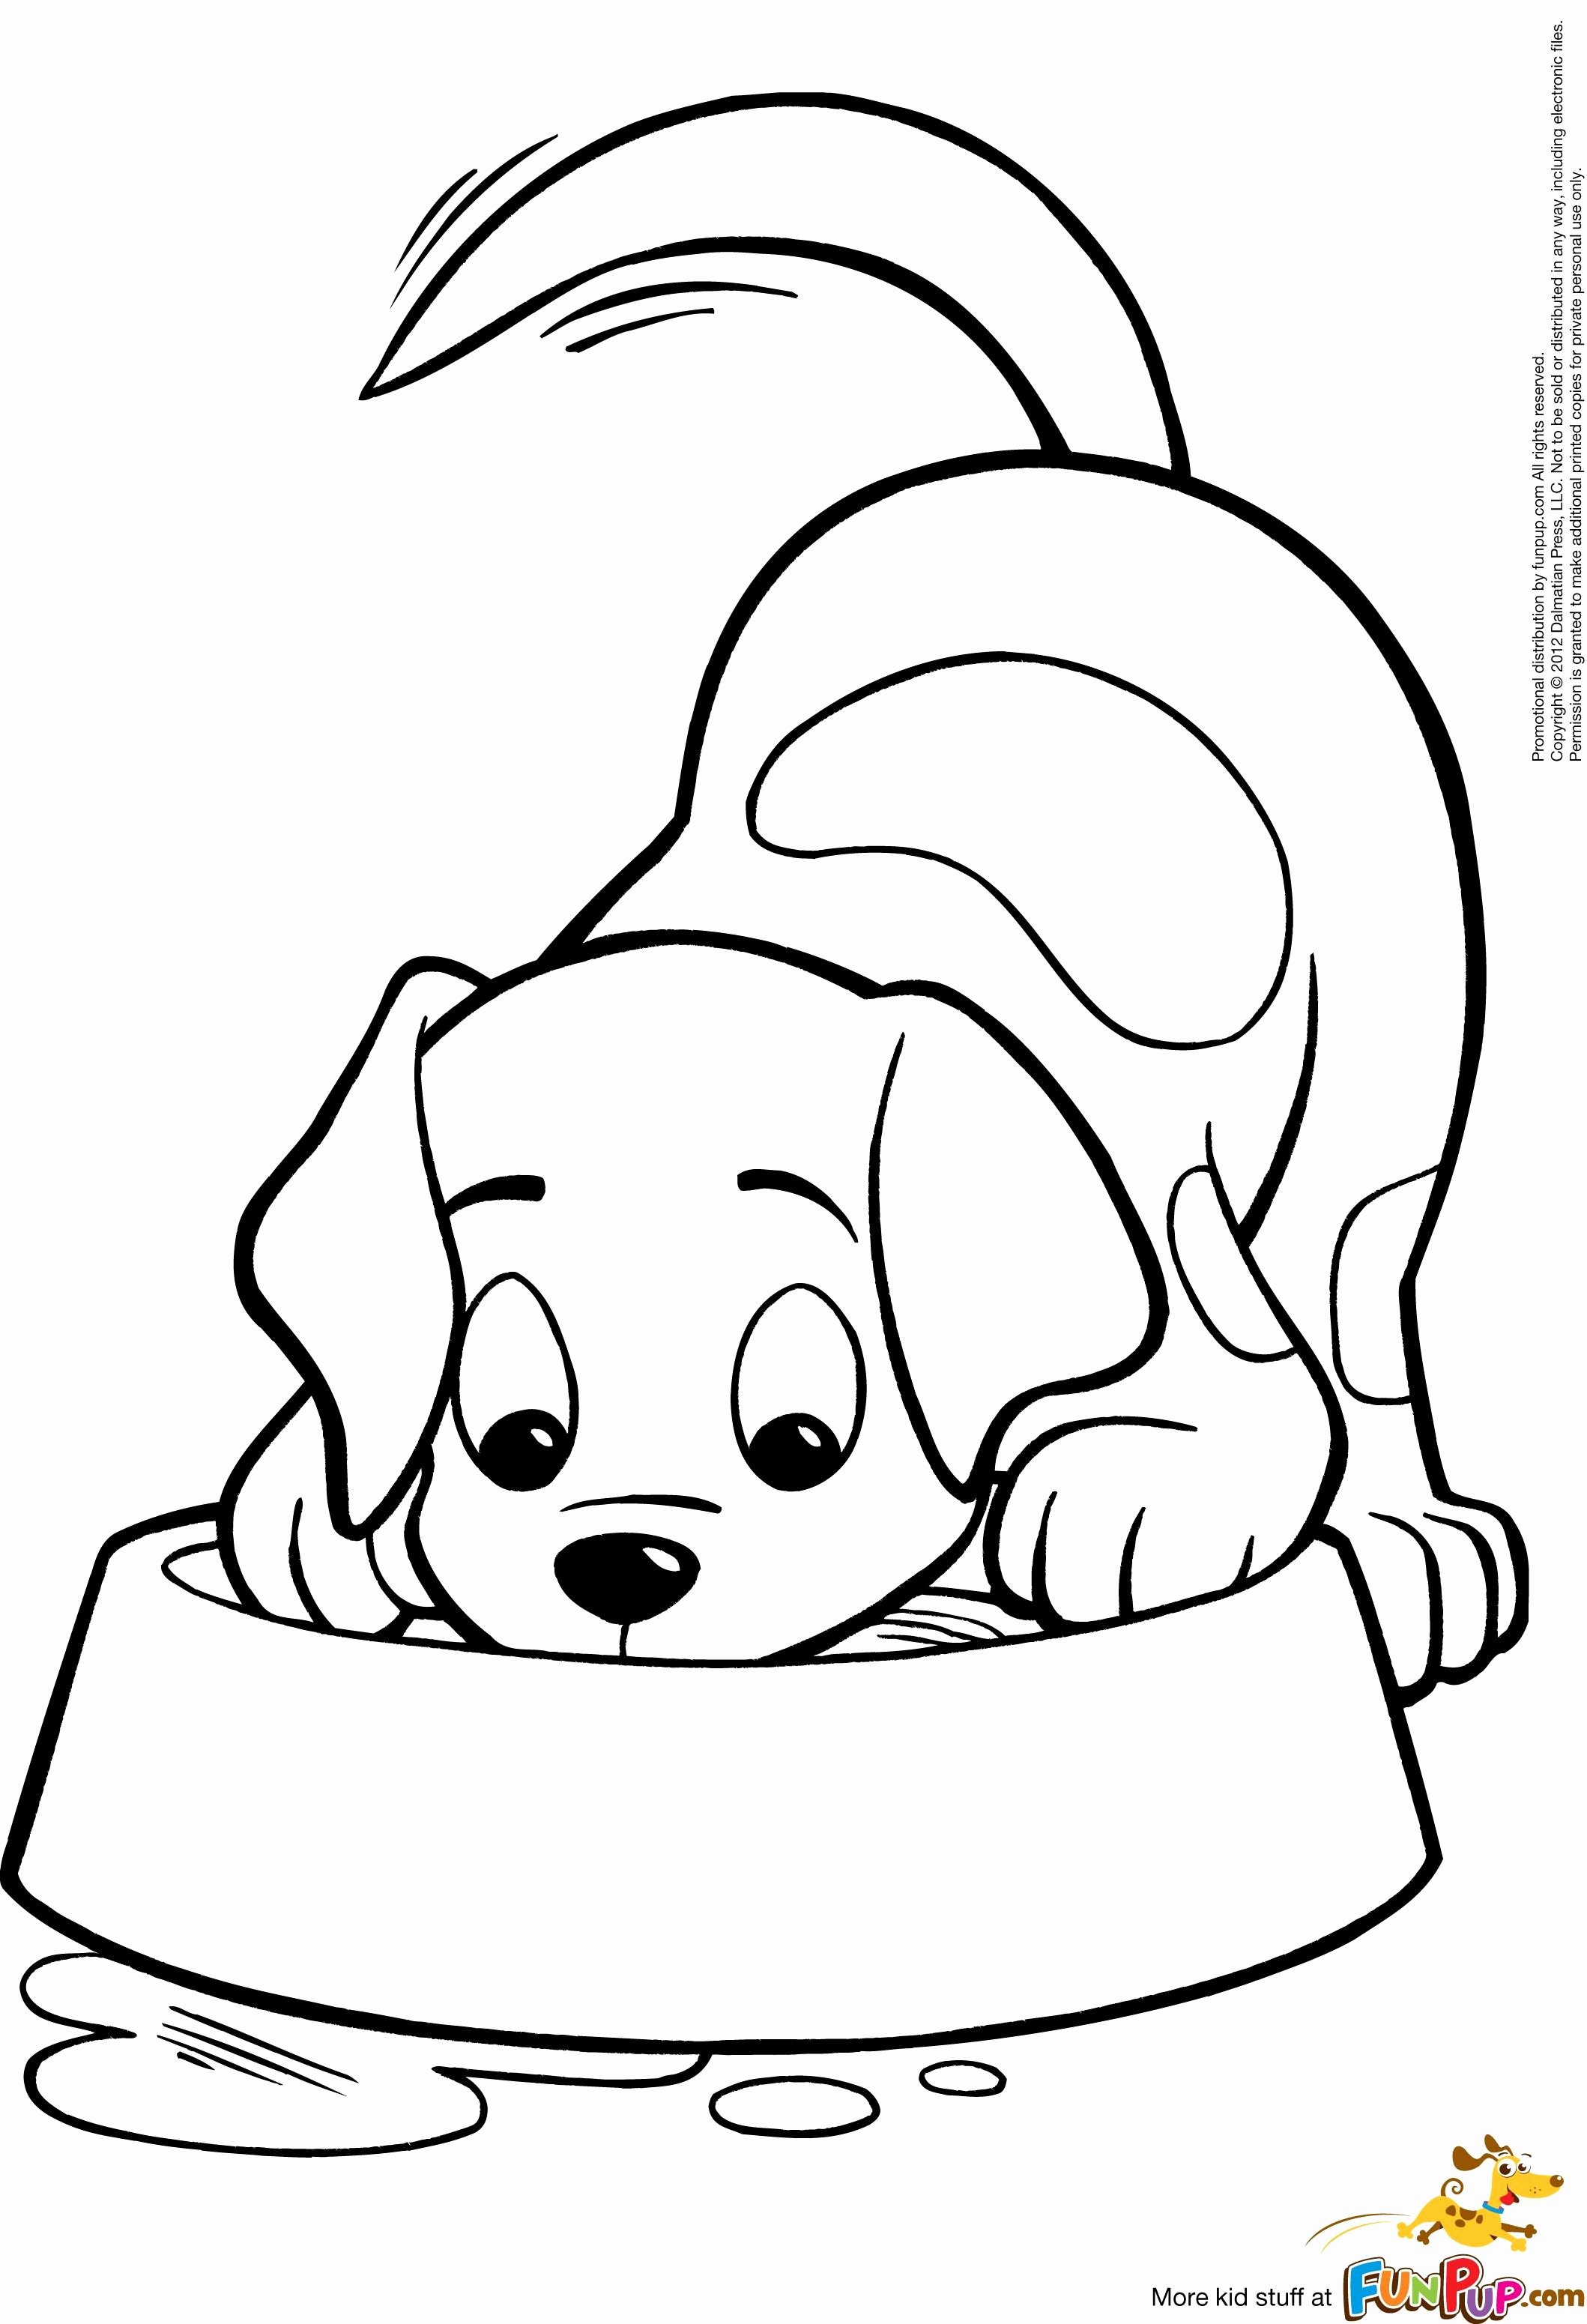 Coloring Pages Of Puppies Lovely Puppy Coloring Pages 13